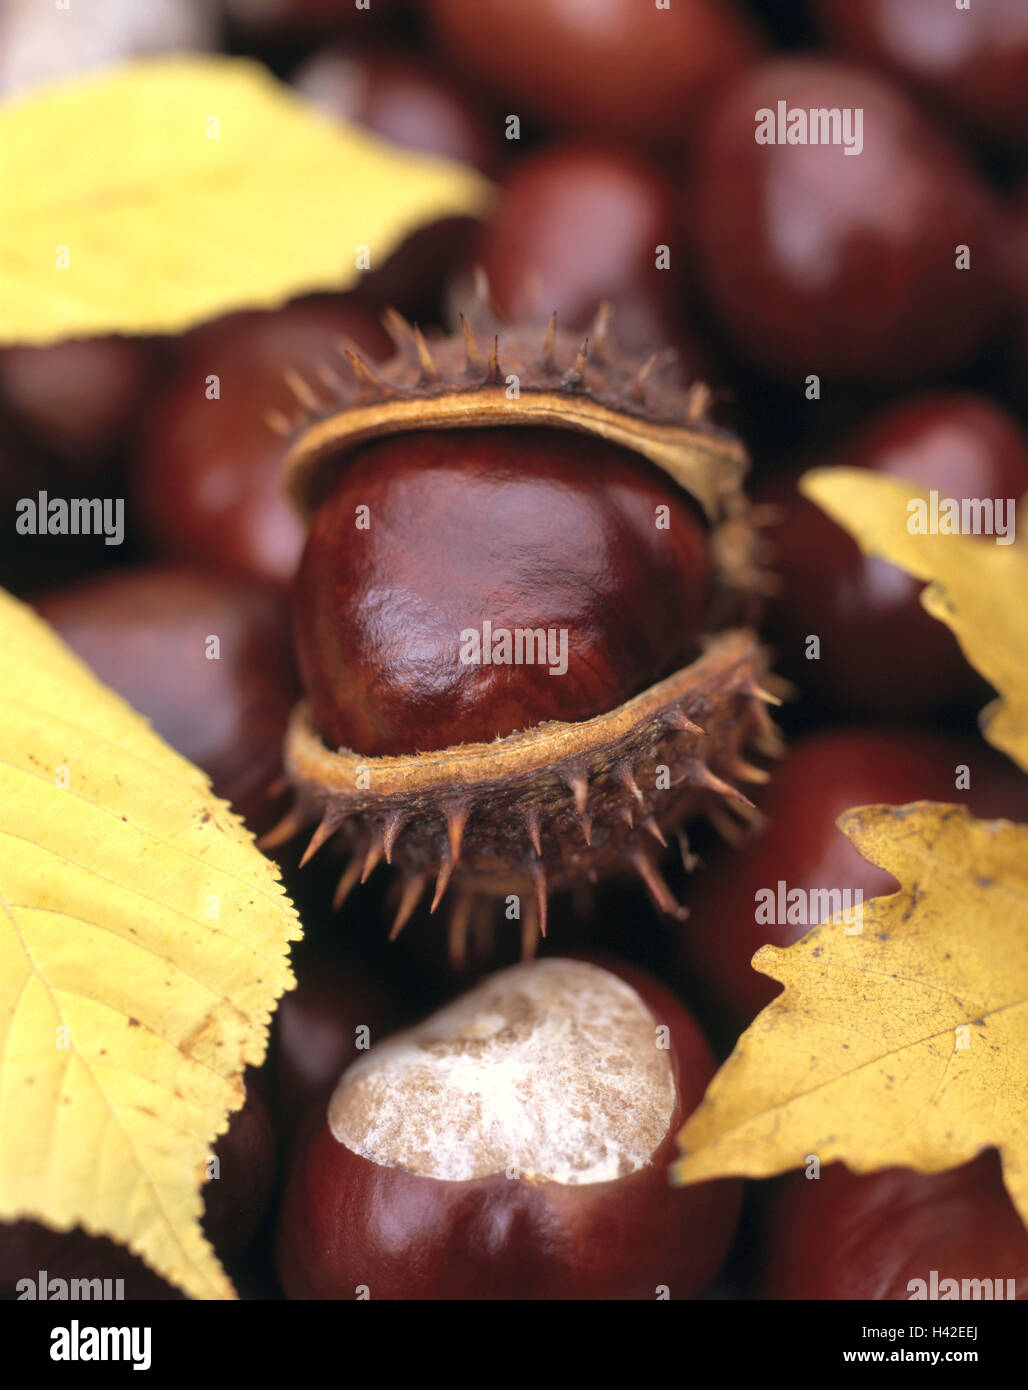 Chestnuts, red horse chestnut, Aesculus x carnea, leaves, autumn, meat Red horse chestnuts, Pavie, Aesculus rubicunda, horse chestnuts, chestnut, capsules, scarfs, spiny, opened, capsule fruits, semens, nature, season, harvest, collect, autumn foliage, ch Stock Photo